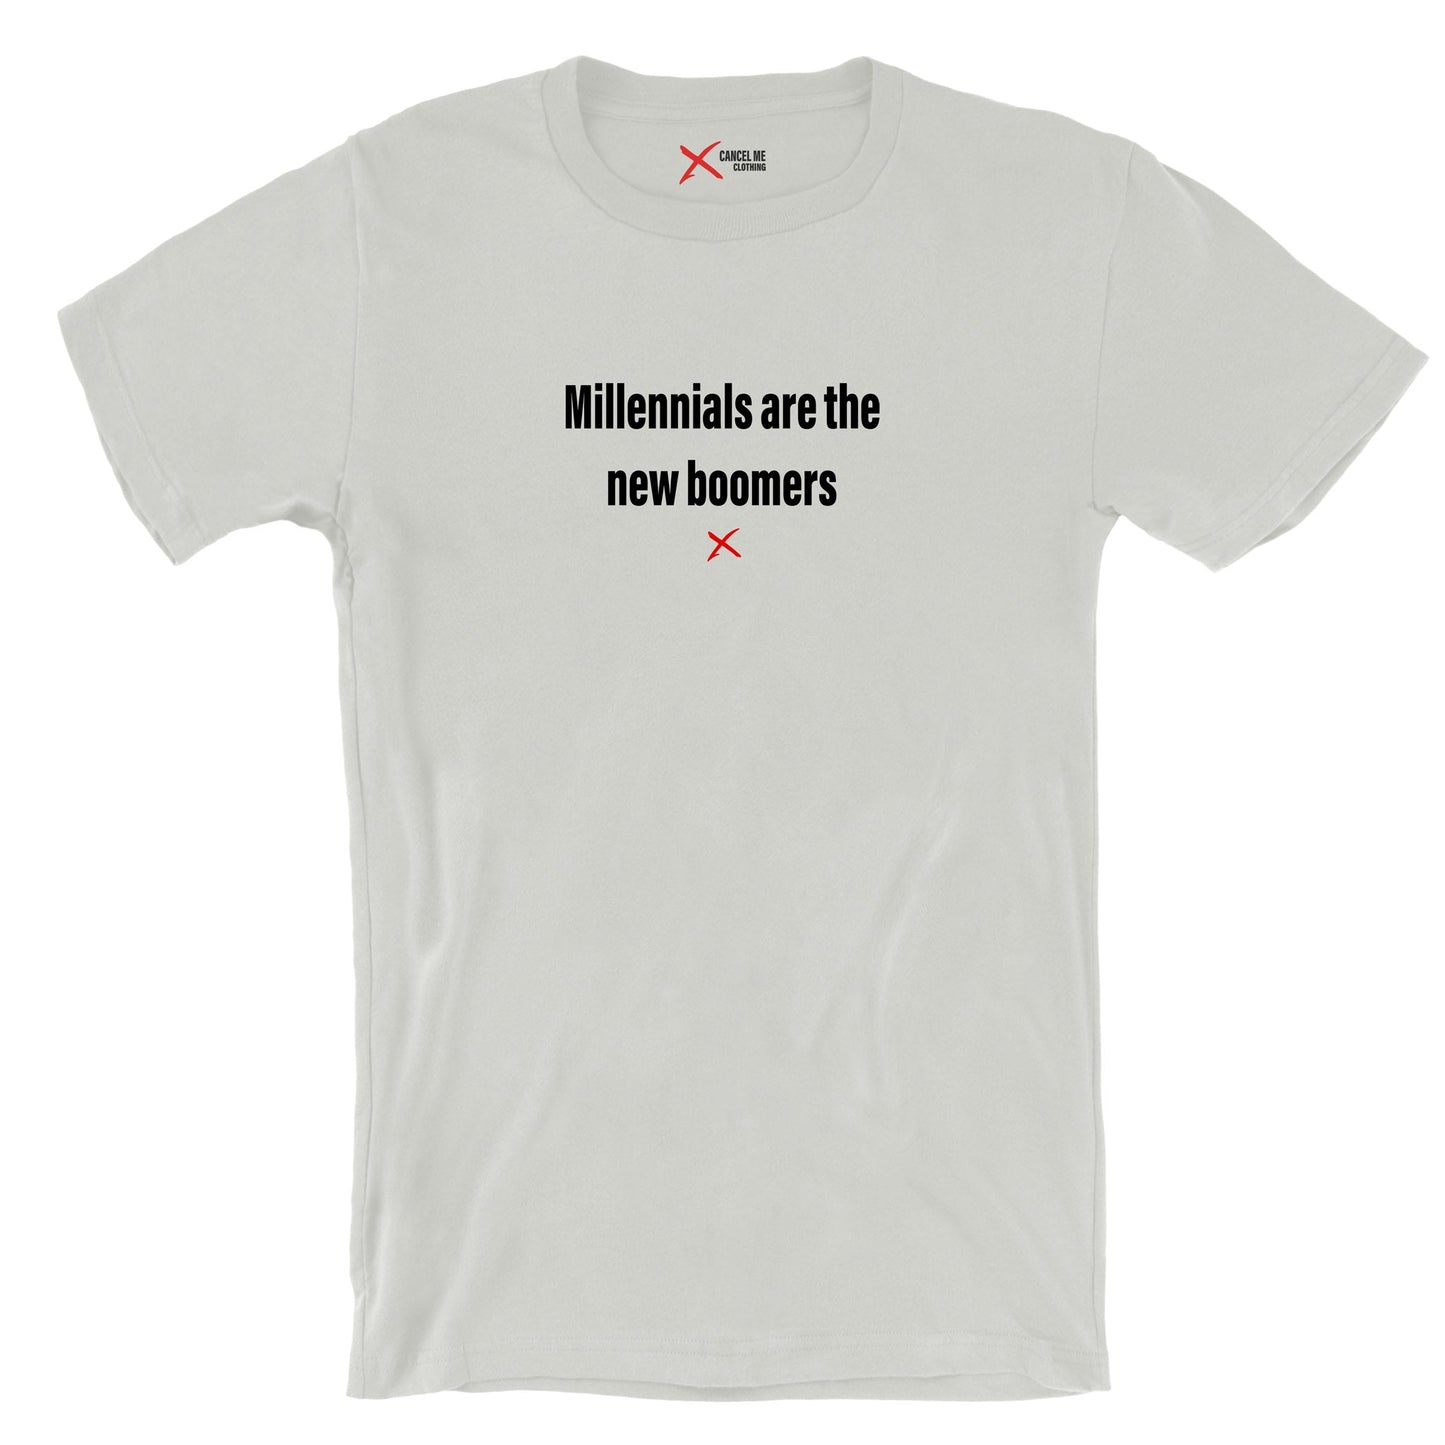 Millennials are the new boomers - Shirt